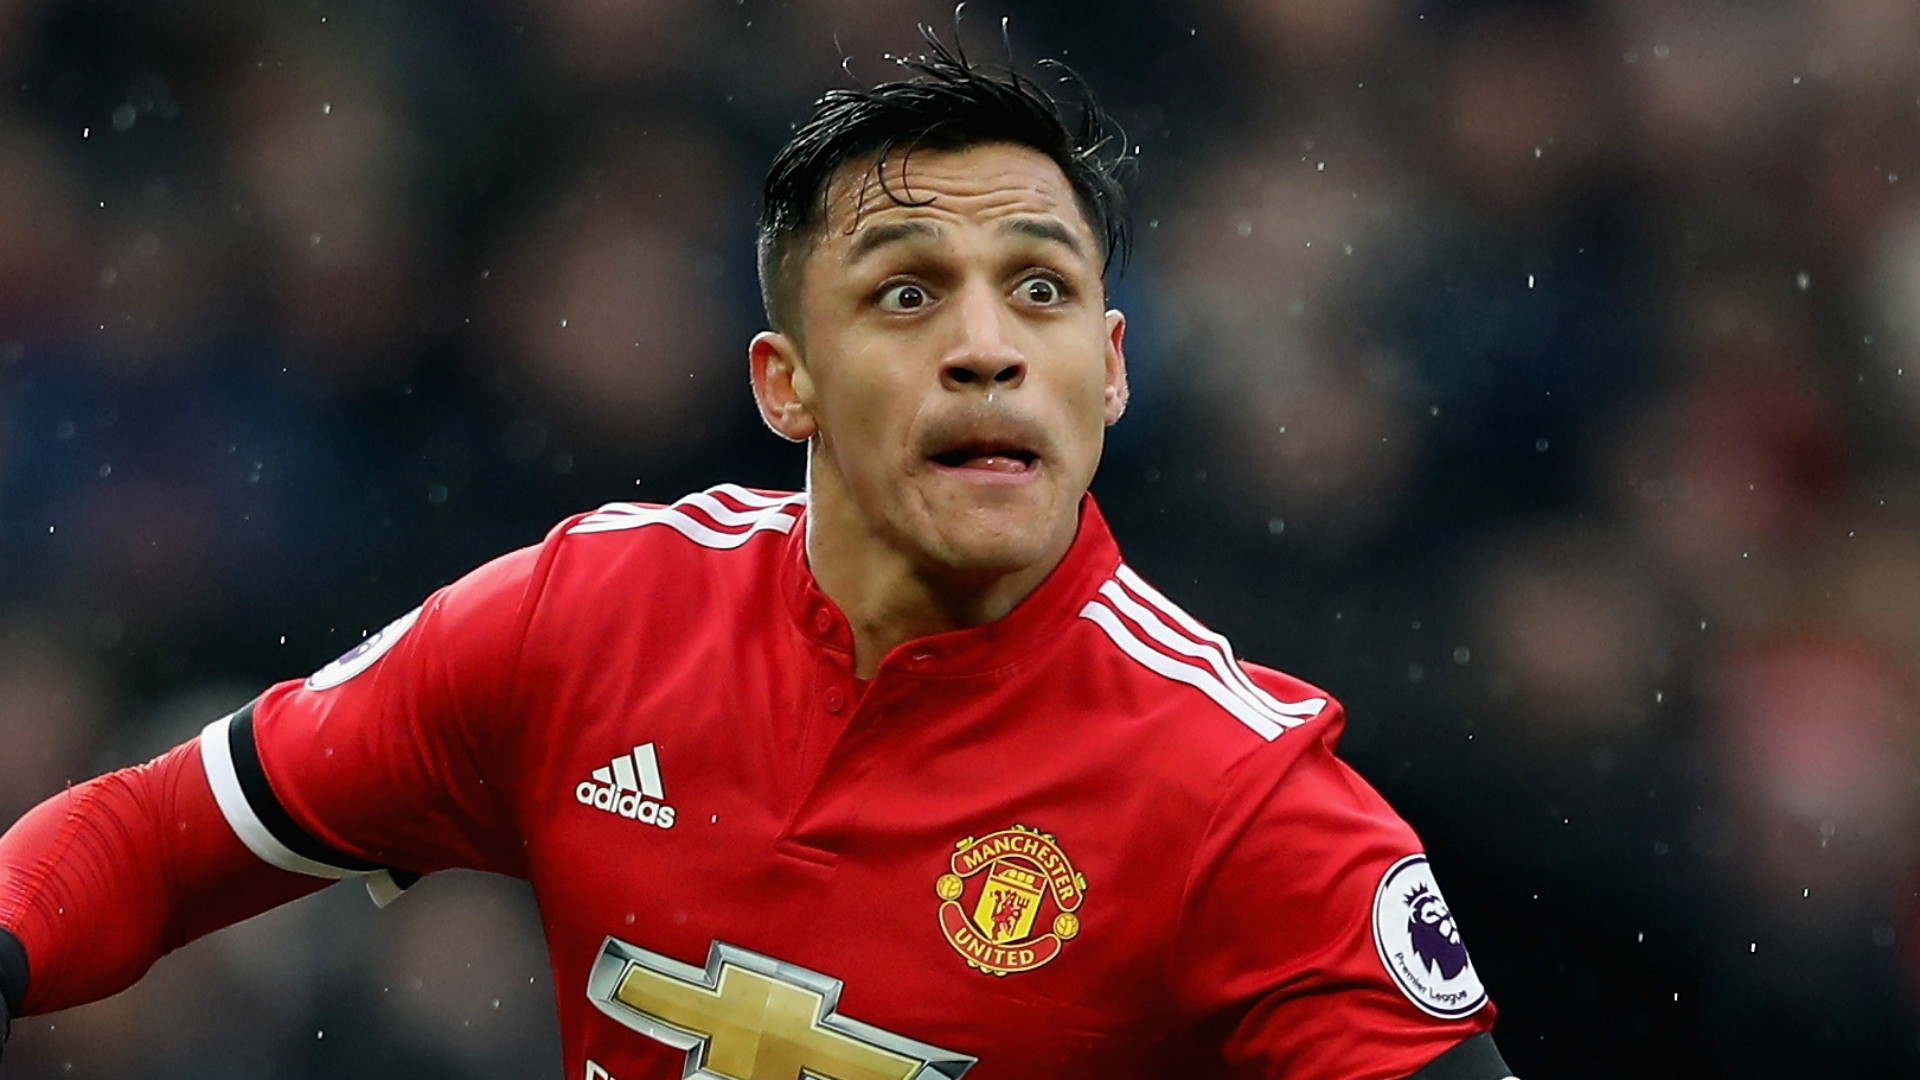 Alexis Sanchez To Be Offered £275,000 A Week Deal With - Manchester United F.c. - HD Wallpaper 